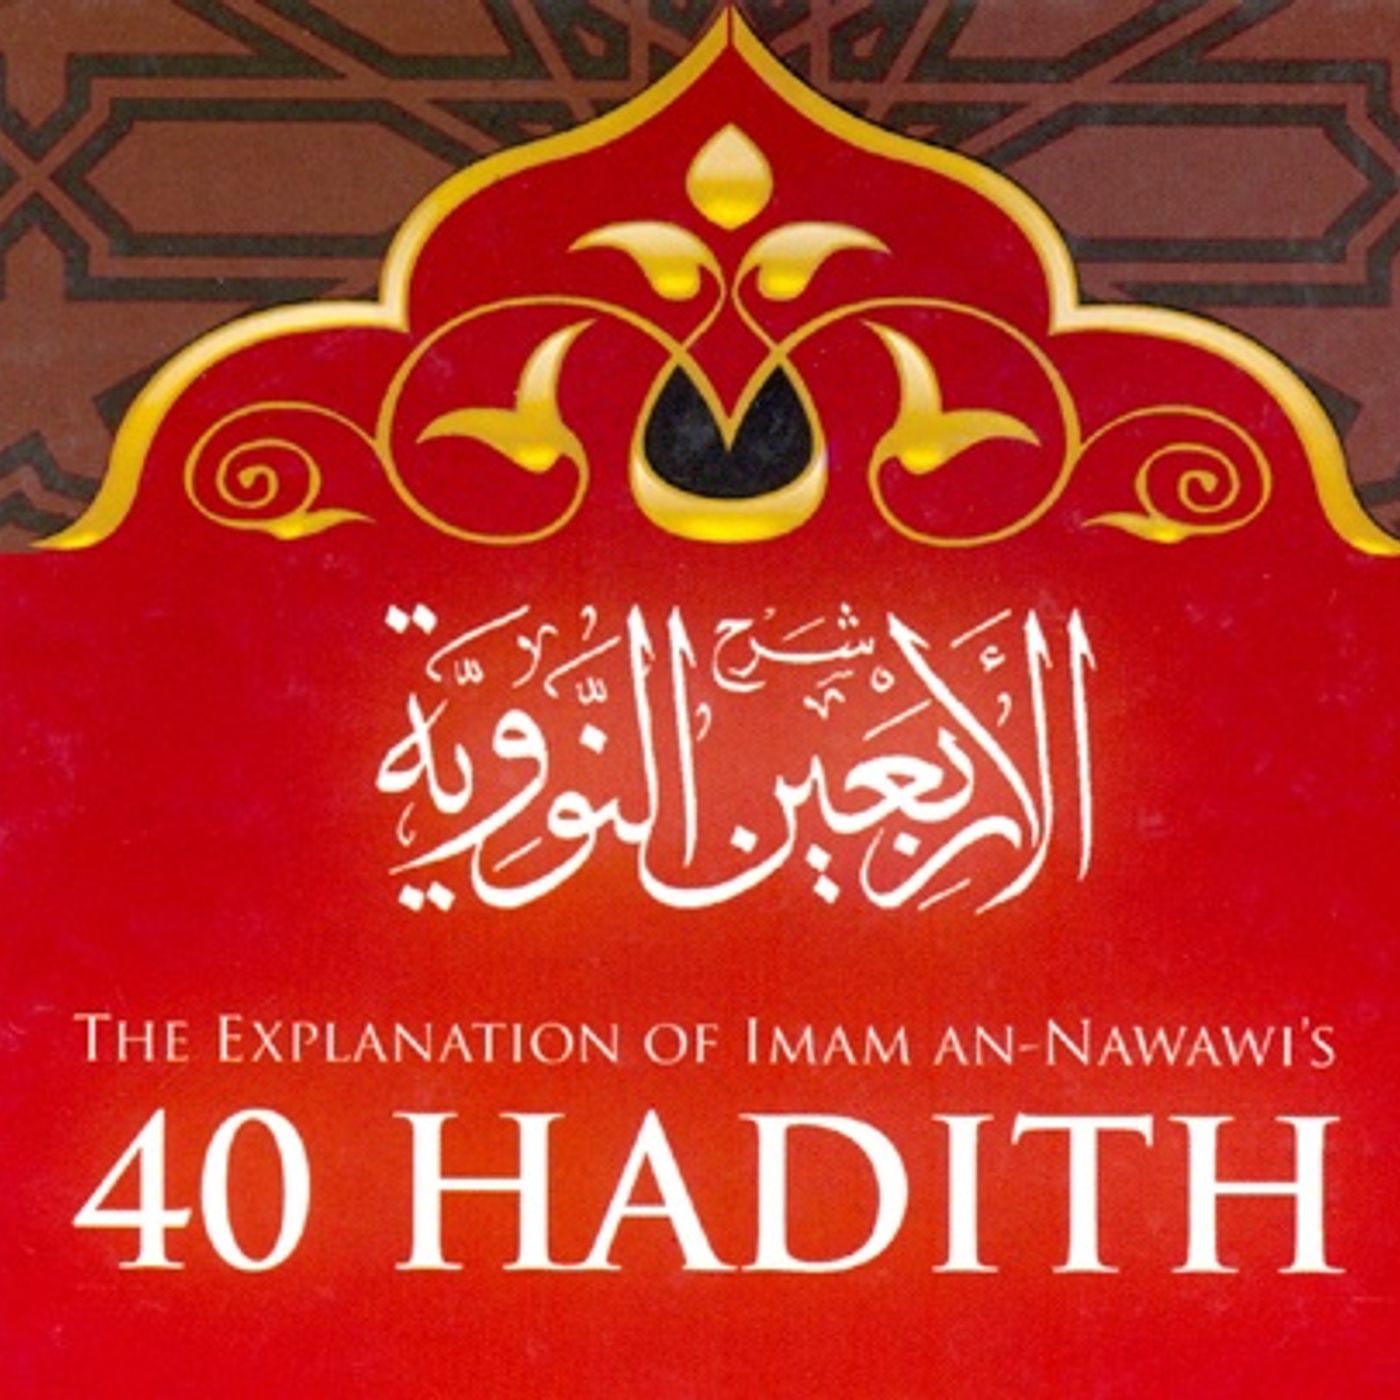 Benefits from Imam An-Nawawi's 40 Hadith